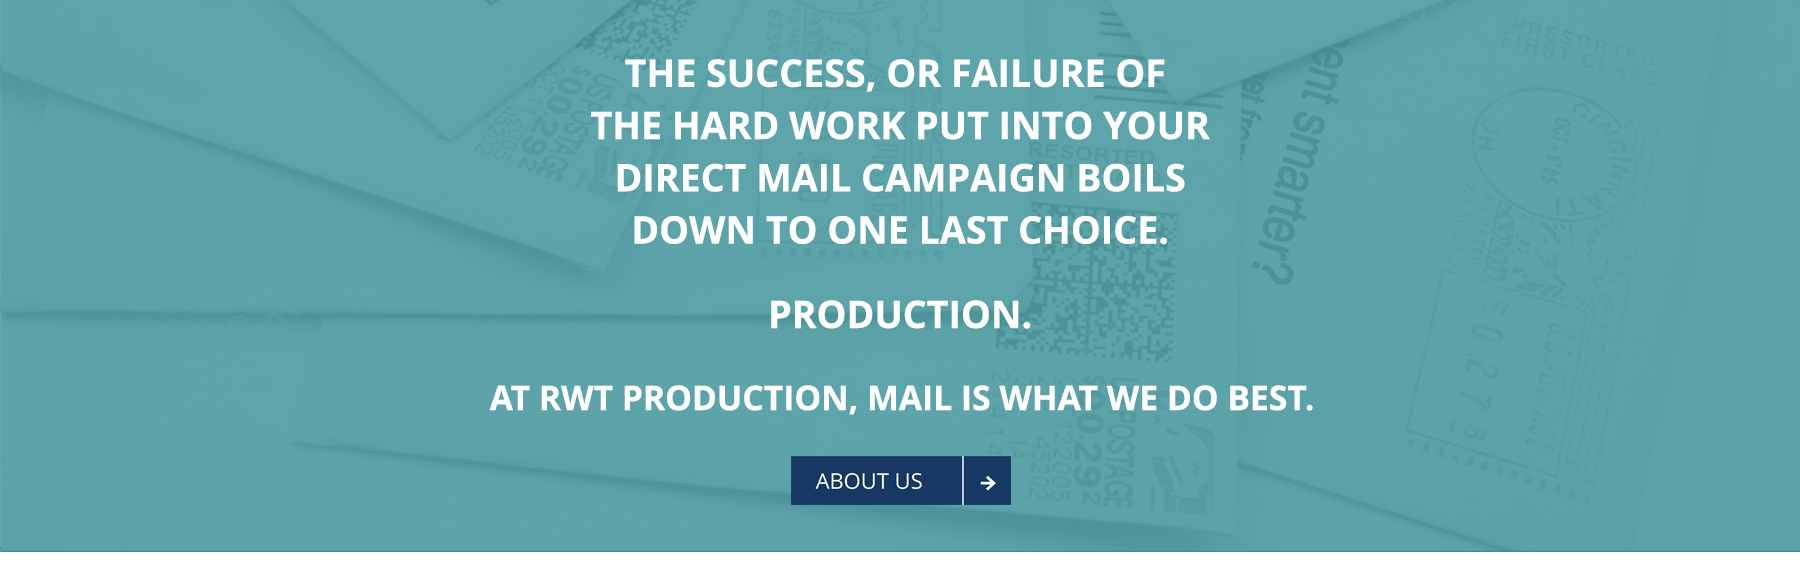 The success, or failure of the hard work put into your direct mail campaign boils down to one last choice. Production. At RWT Production, Mail is what we do best